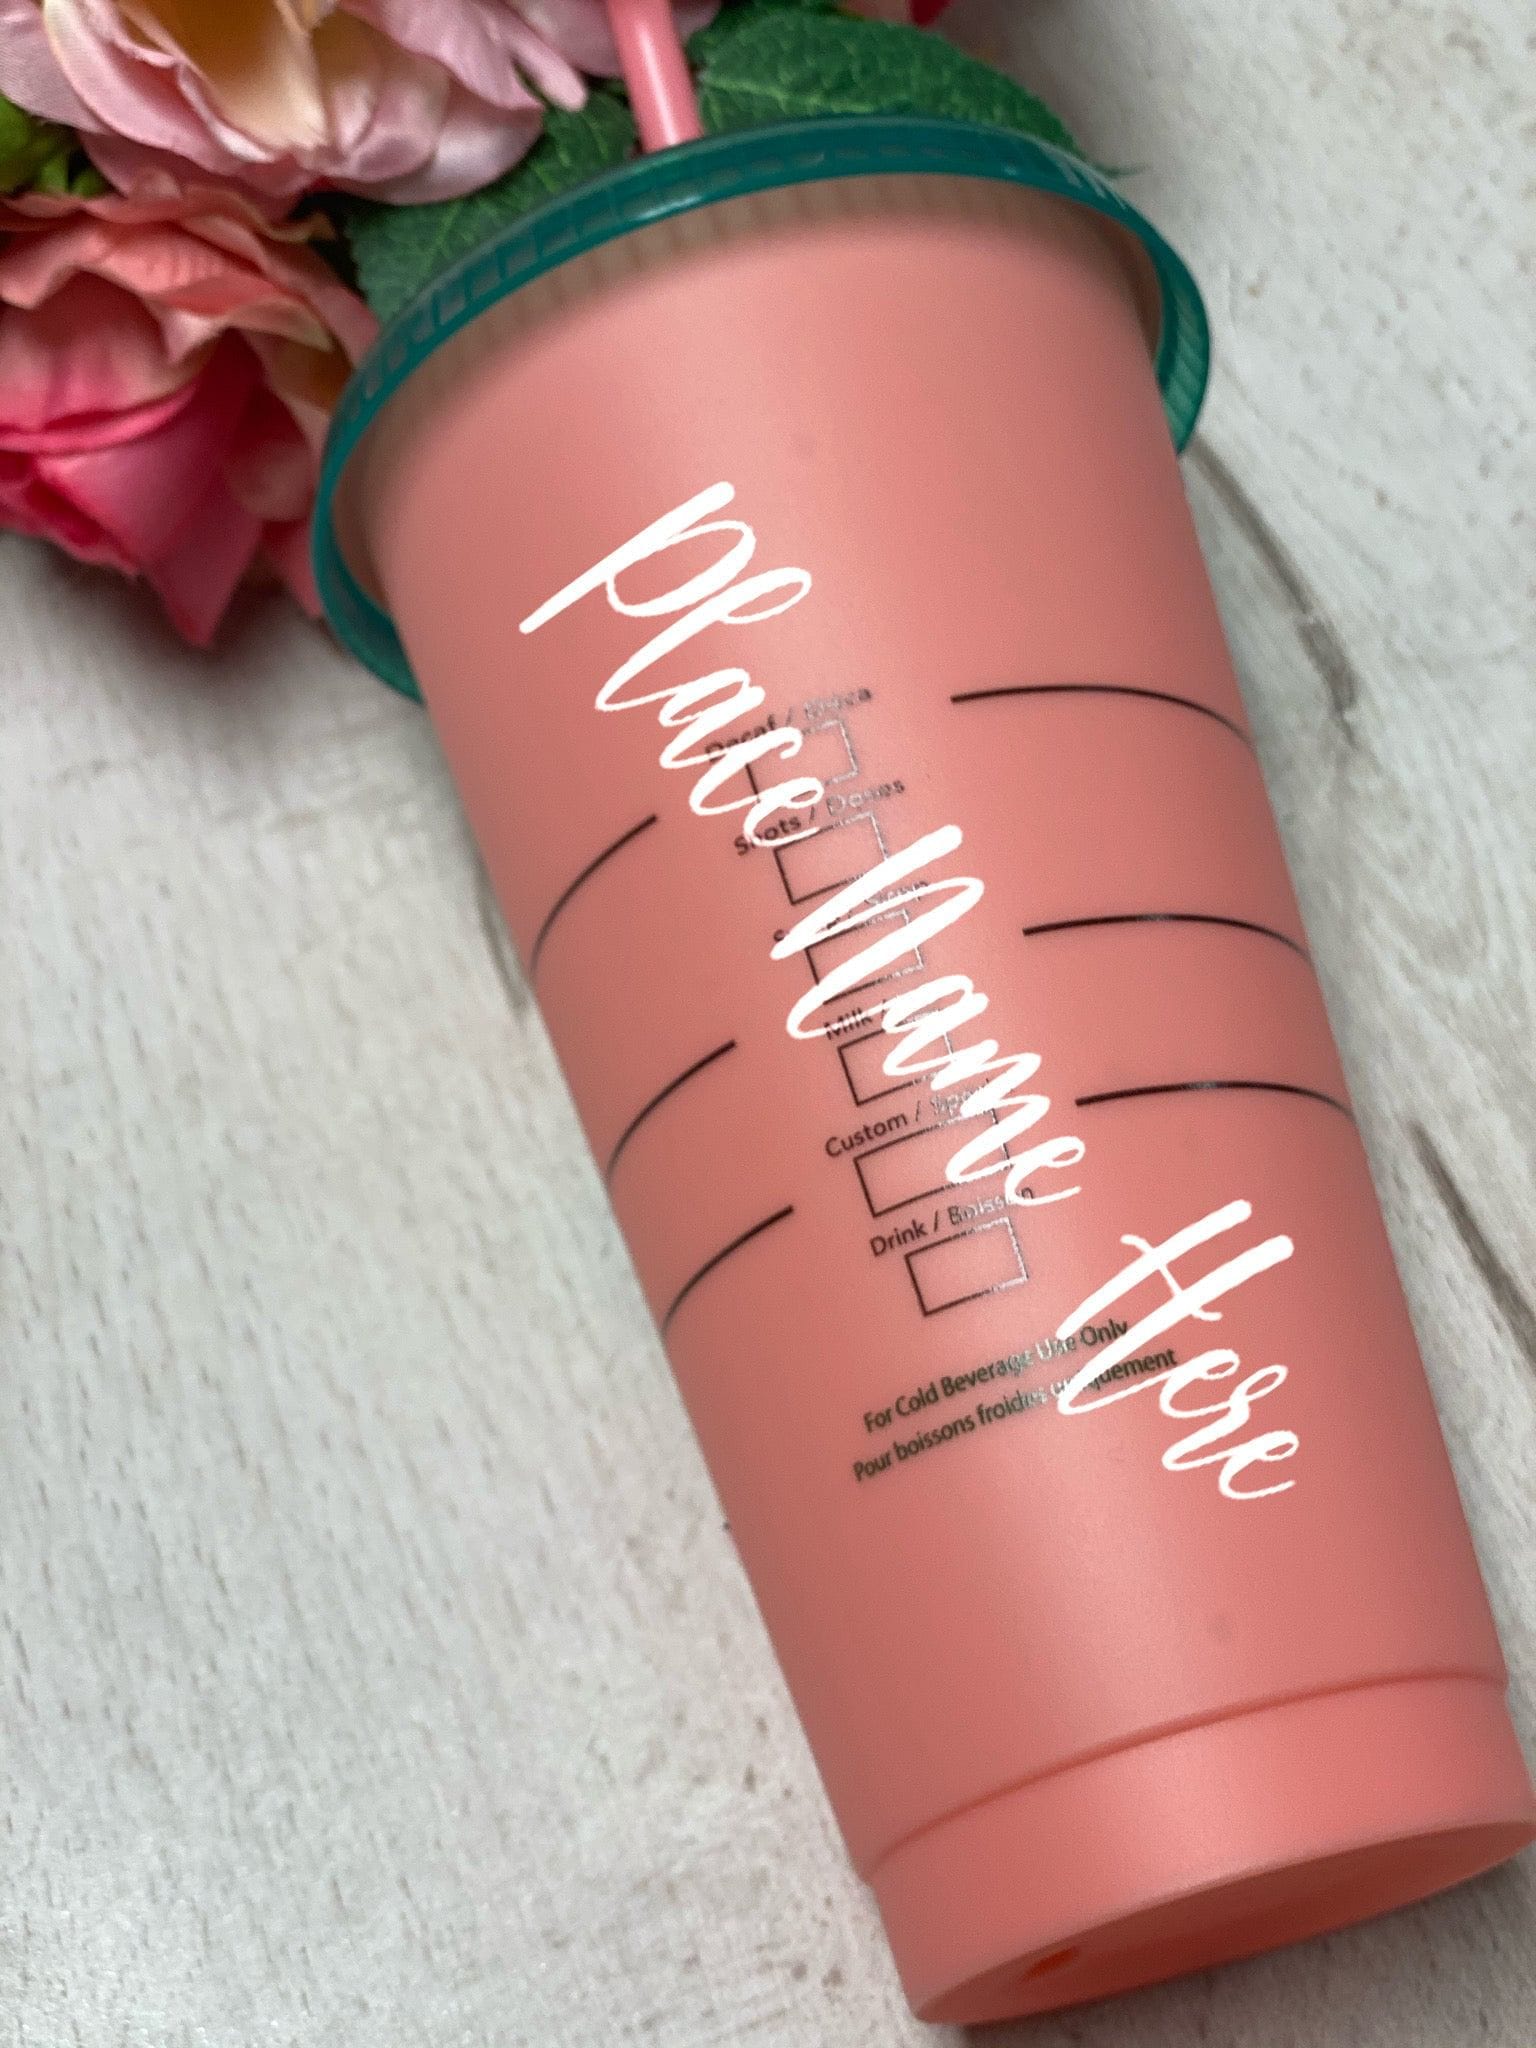 24 oz Personalized Starbucks cup (name only)